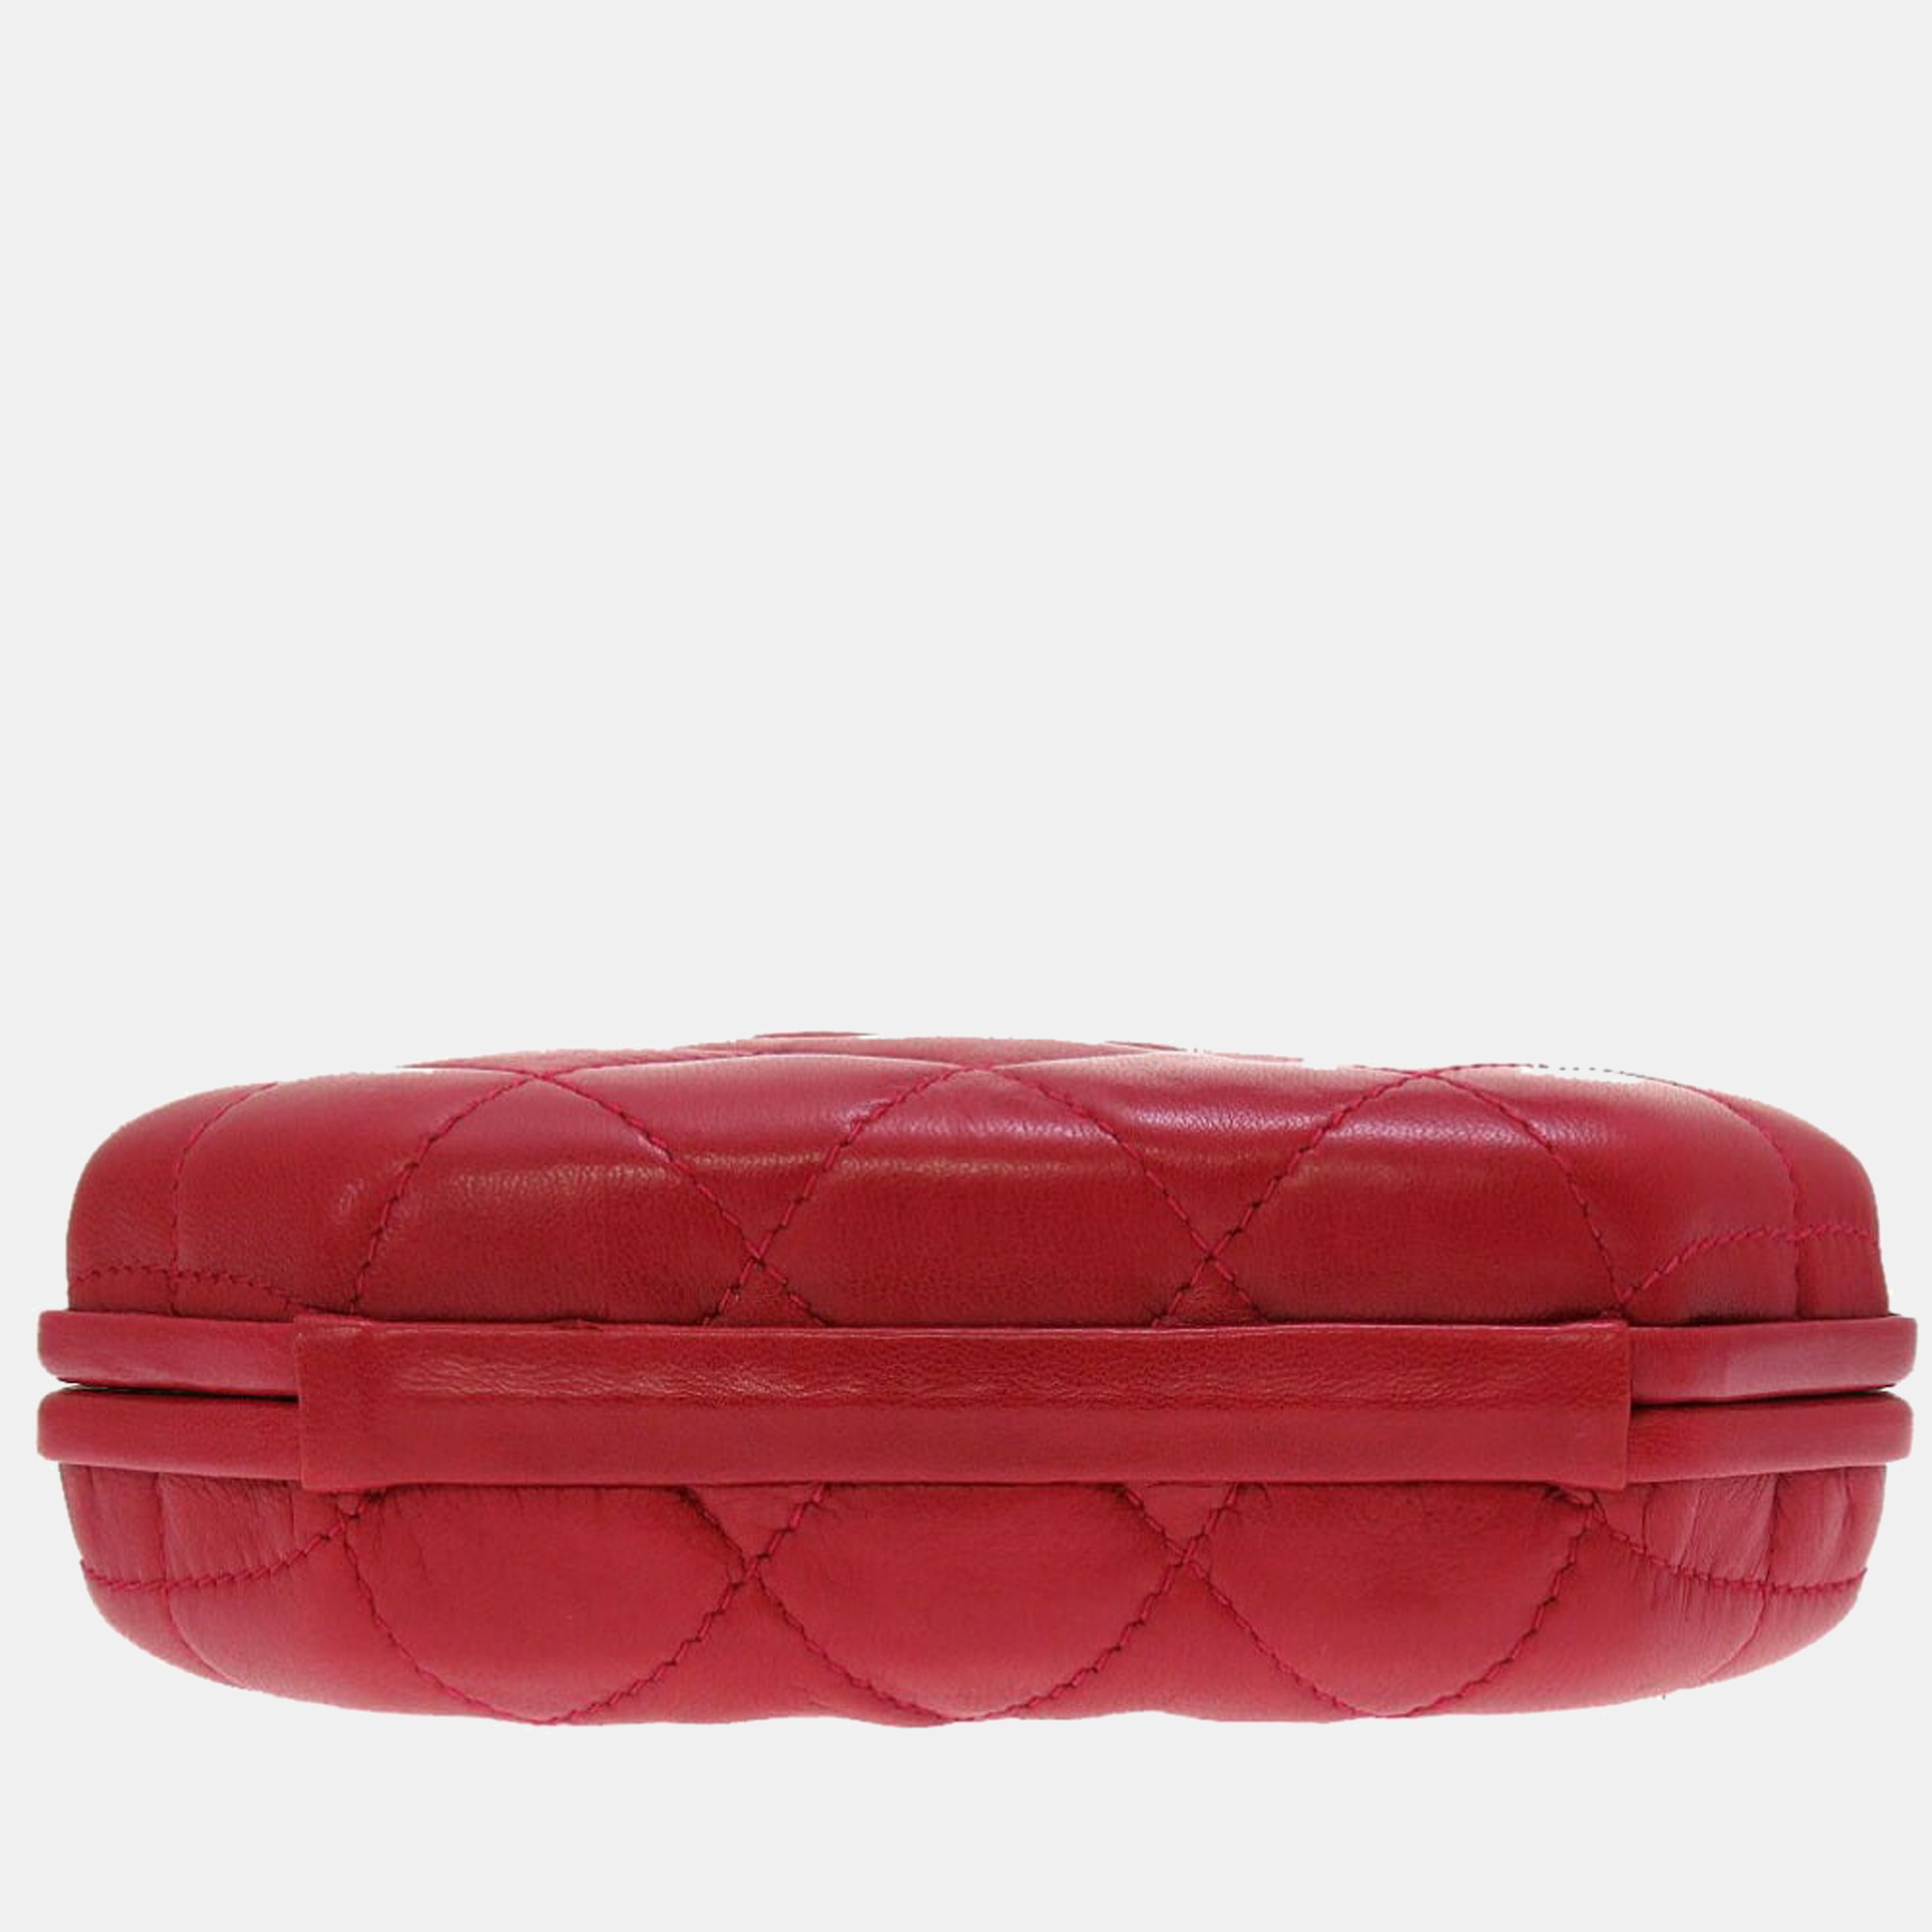 Chanel Red Matelasse Leather Clutch On Chain